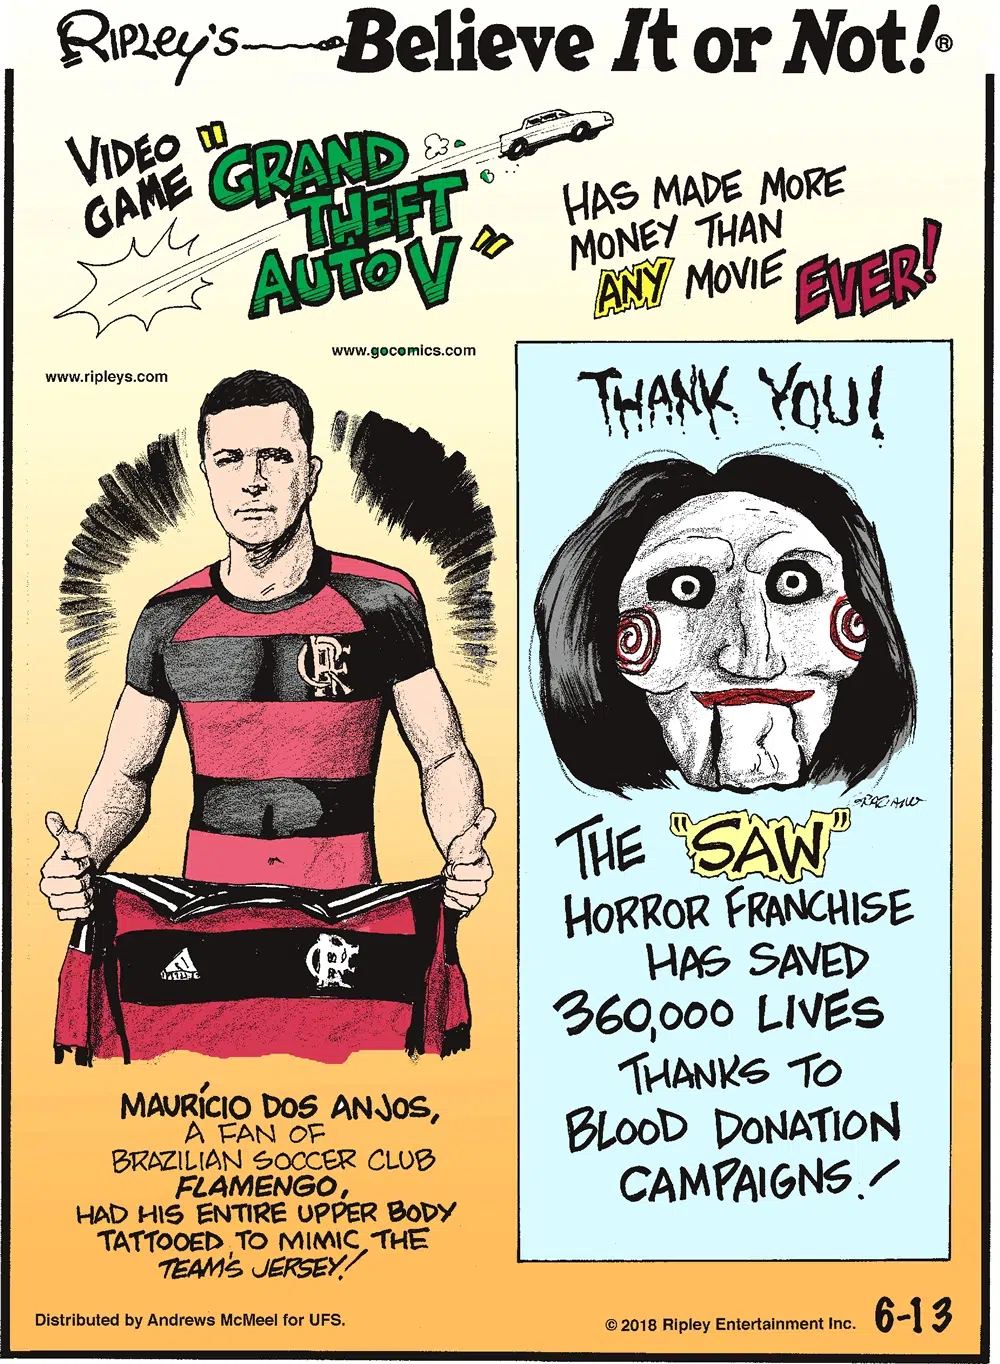 Video game "Grand Theft Auto V" has made more money than any movie ever!--------------------- Mauricio Dos Anjos, a fan of Brazilian Soccer Club Flamengo, had his entire upper body tattooed to mimic the team's jersey!-------------------- The "Saw" horror franchise has saved 360,000 lives thanks to blood donation campaigns!